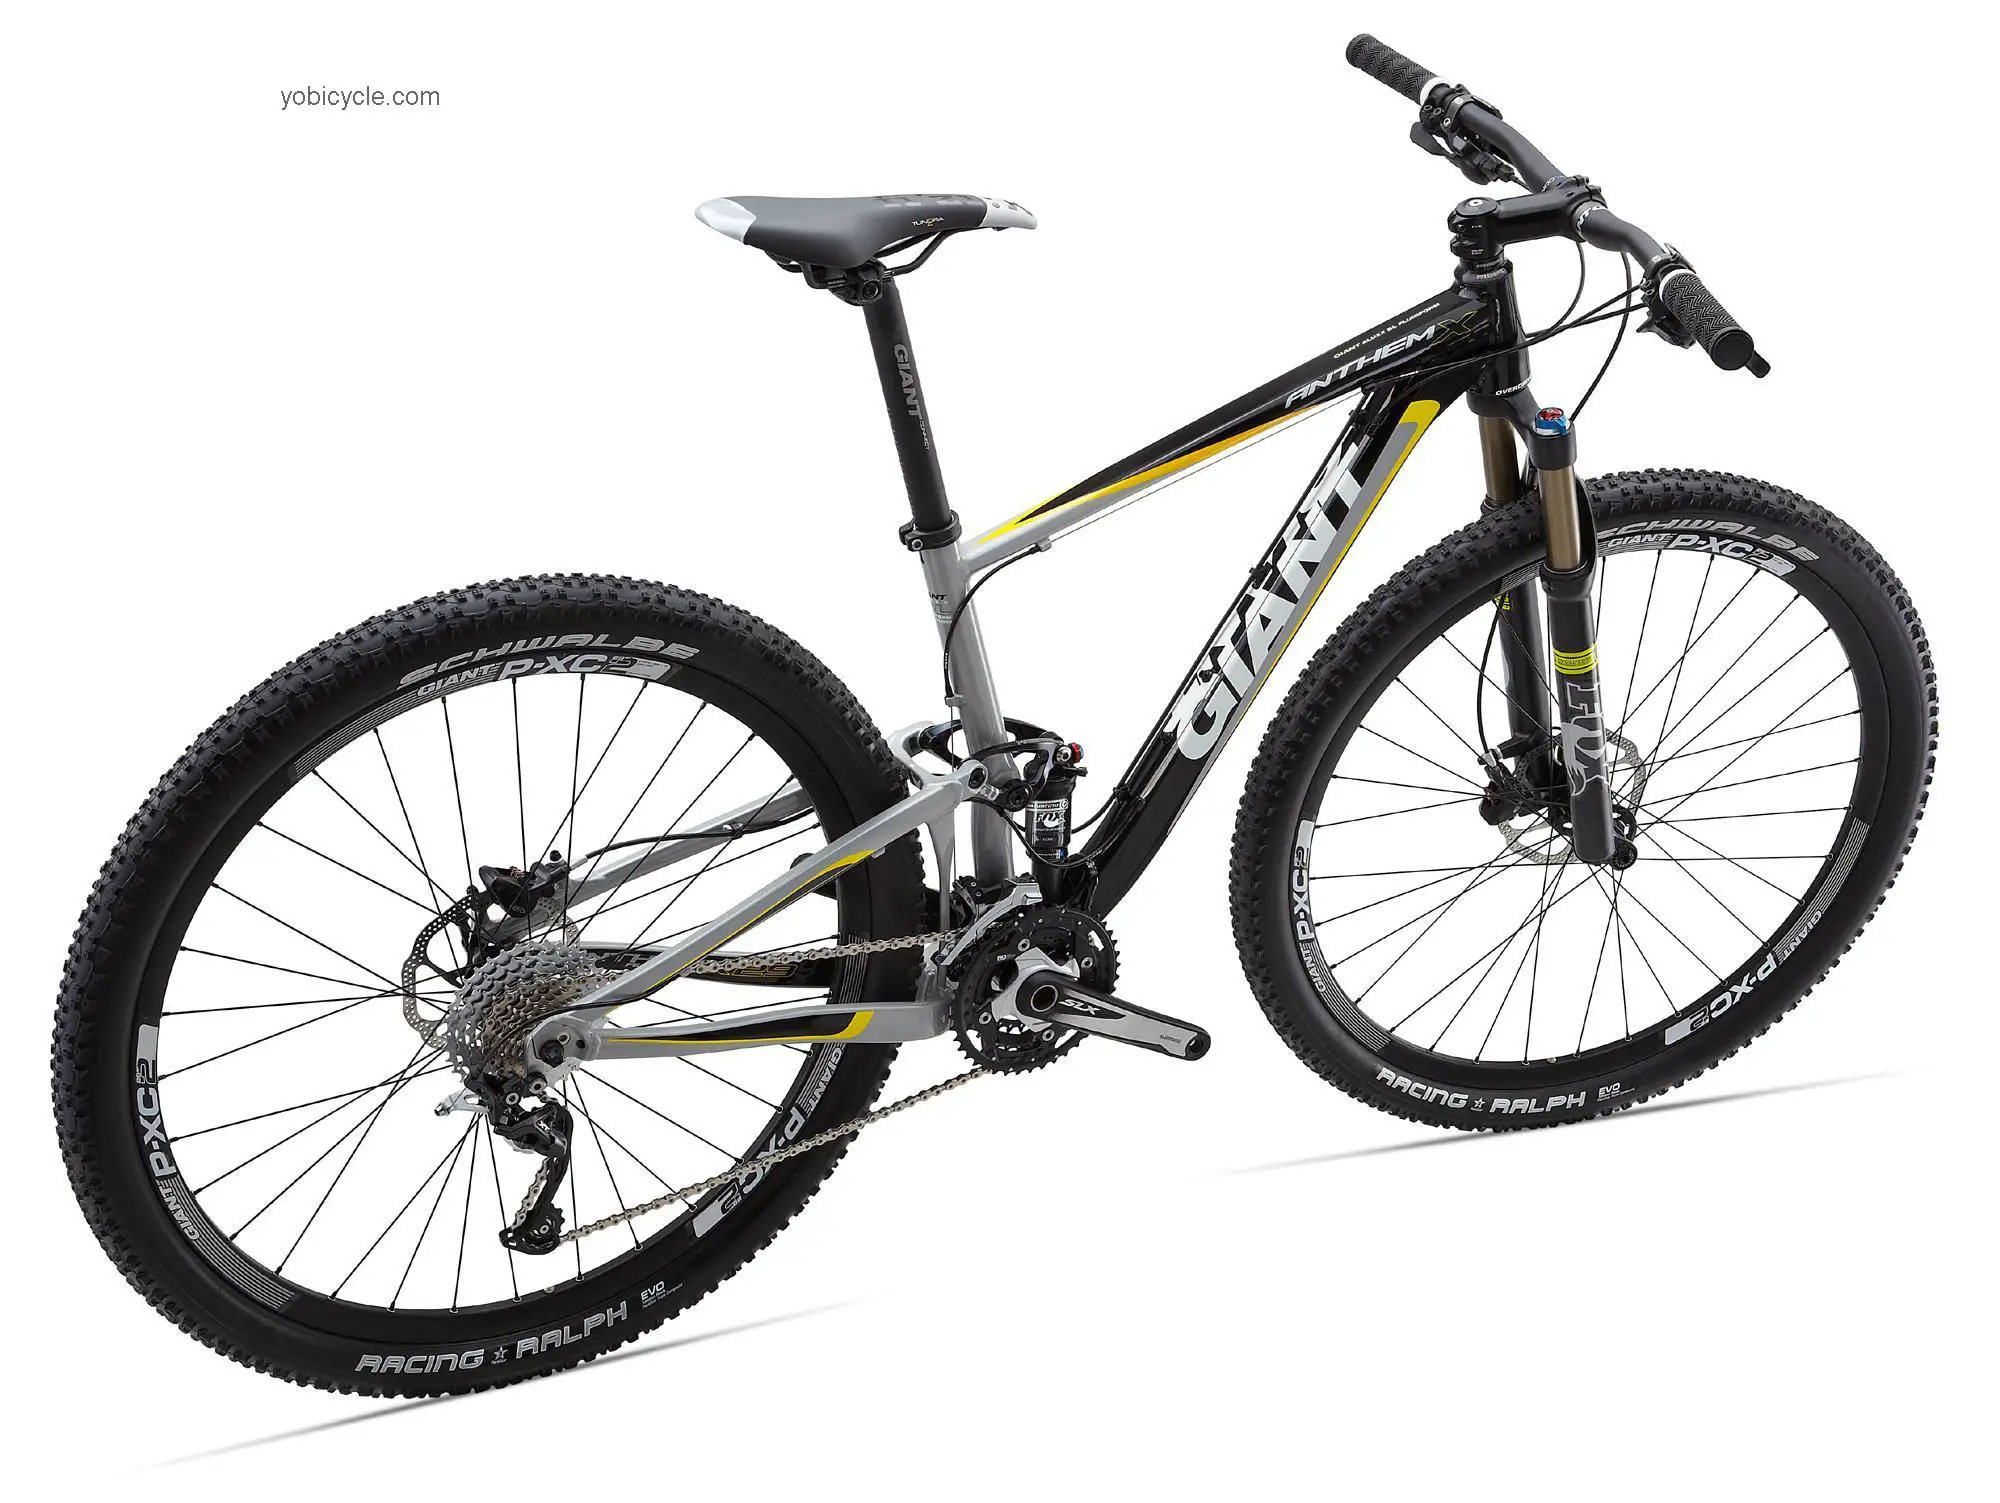 Giant Anthem X 29er 1 2013 comparison online with competitors